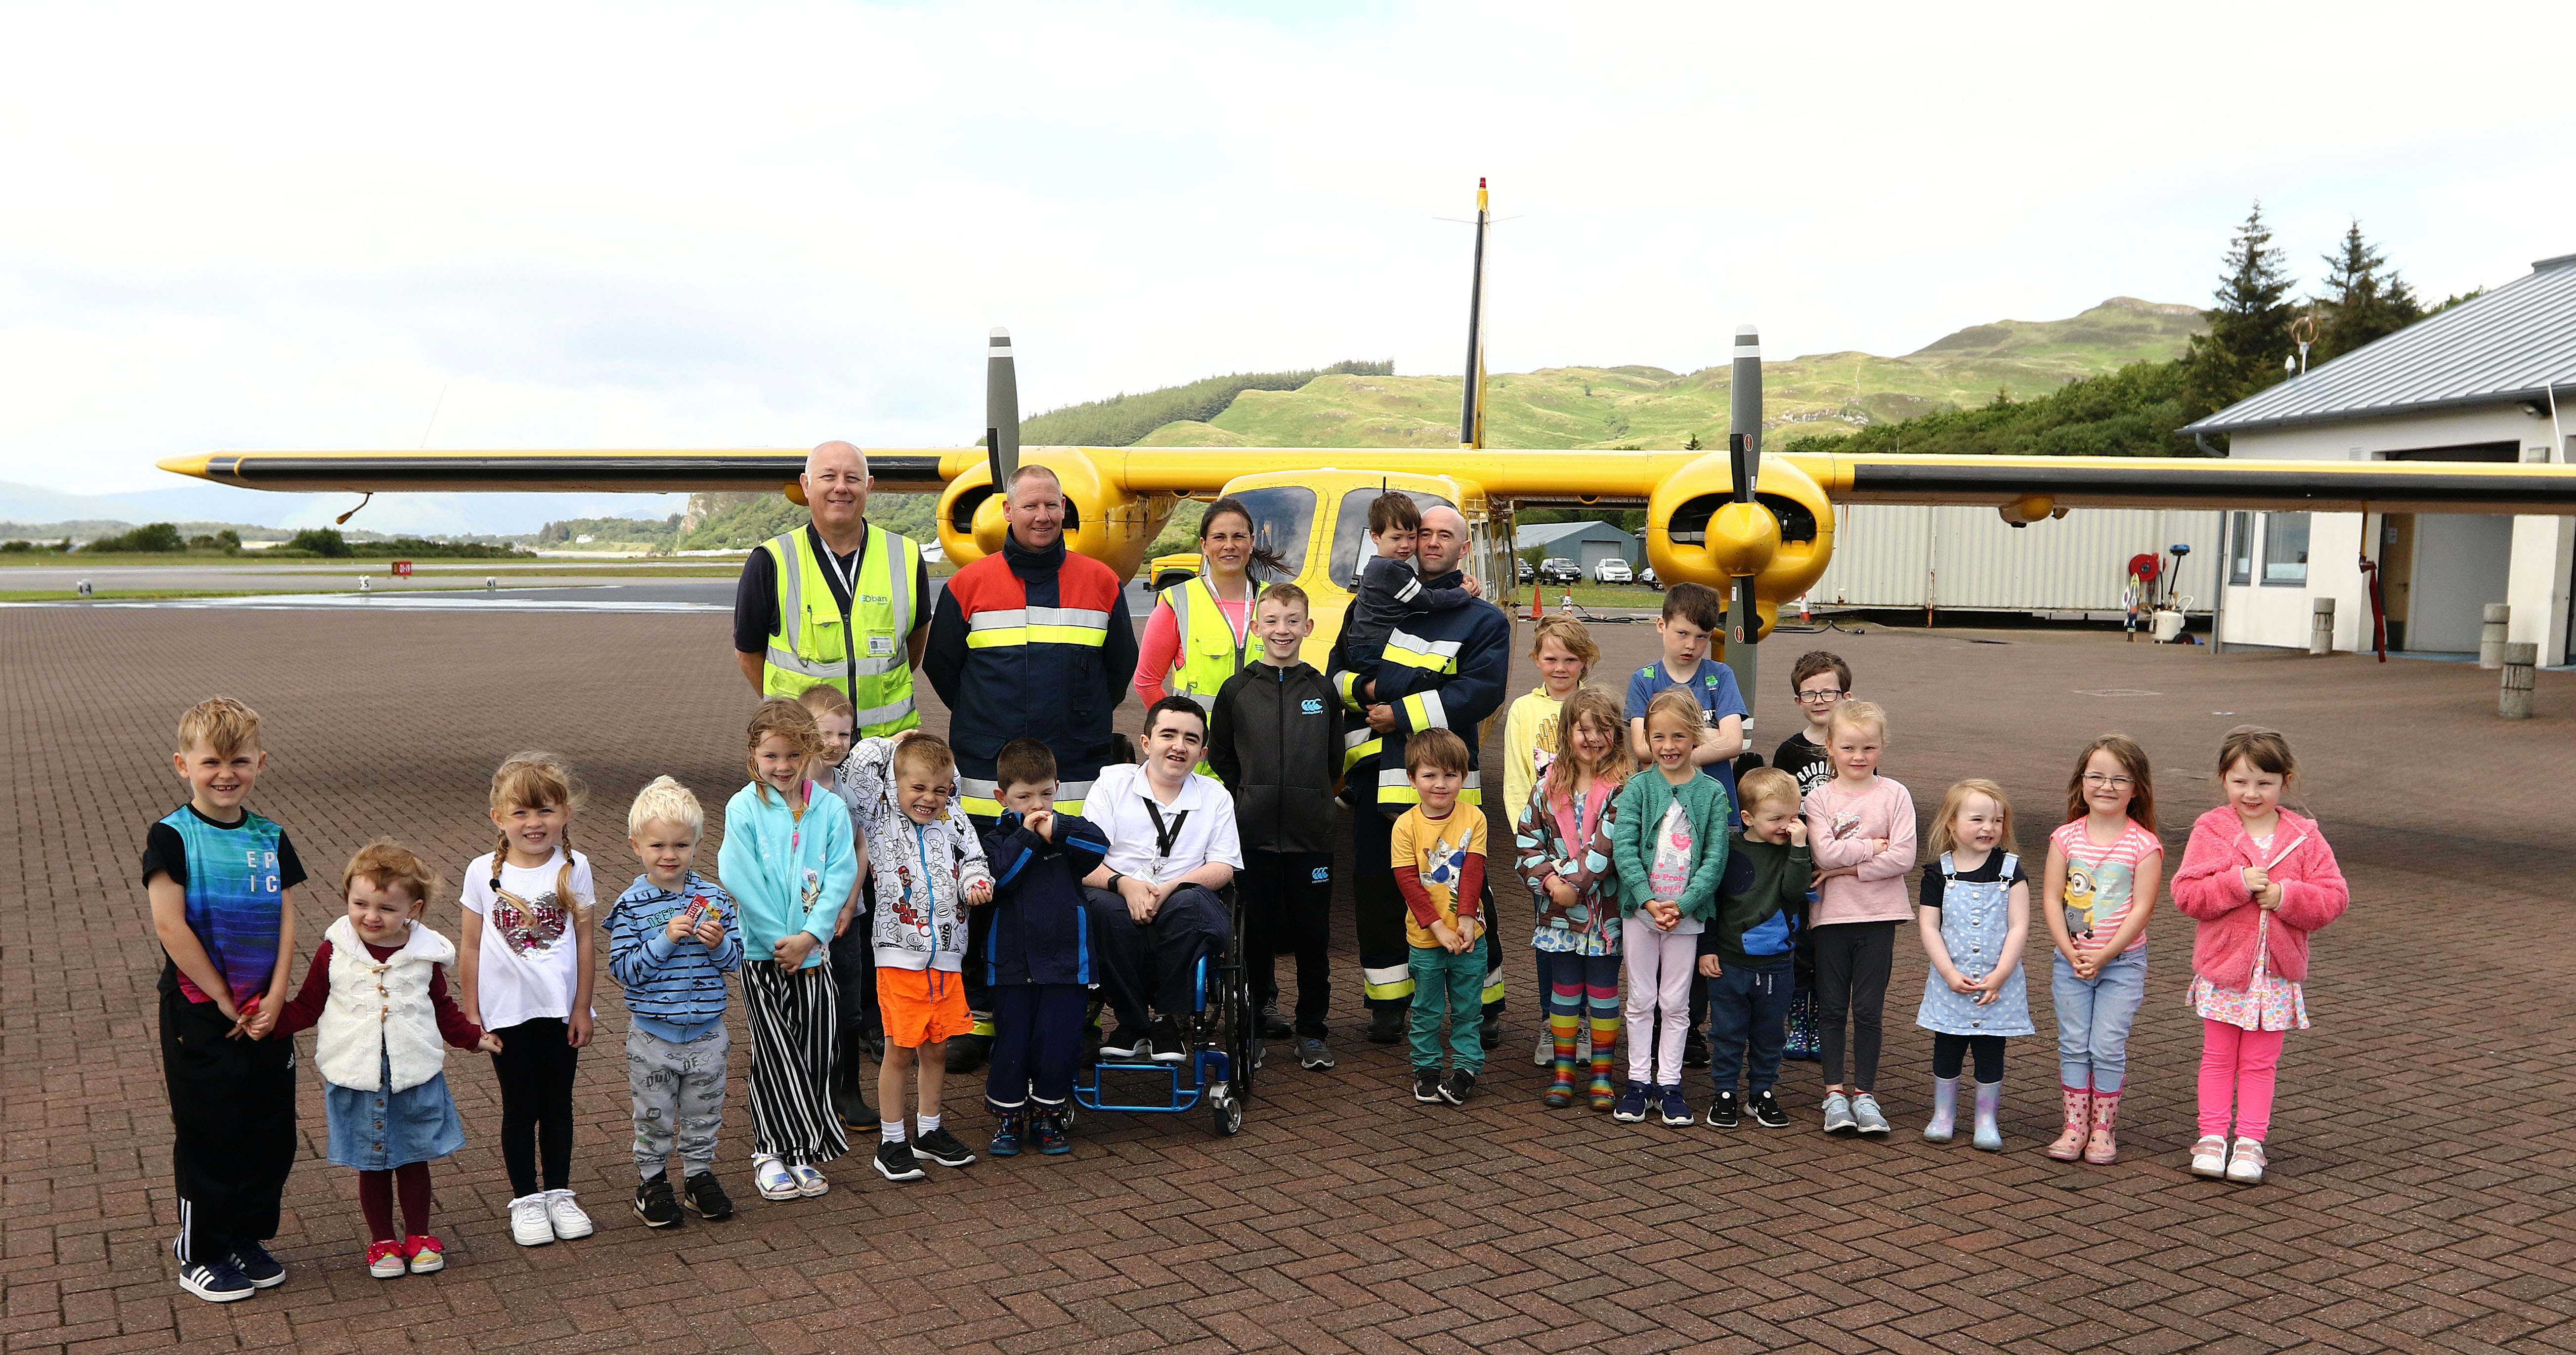 Cameron  Allen (centre chair) with the children and members of Oban Airport Fire crew Tom Eddelston, Murray MacGregor, Katherine Dempster who organised the walk and the refreshment  and paul mackay  who walked the perimeter of Oban Airport to raise funds for Cameron to complete his course picture kevin mcglynn